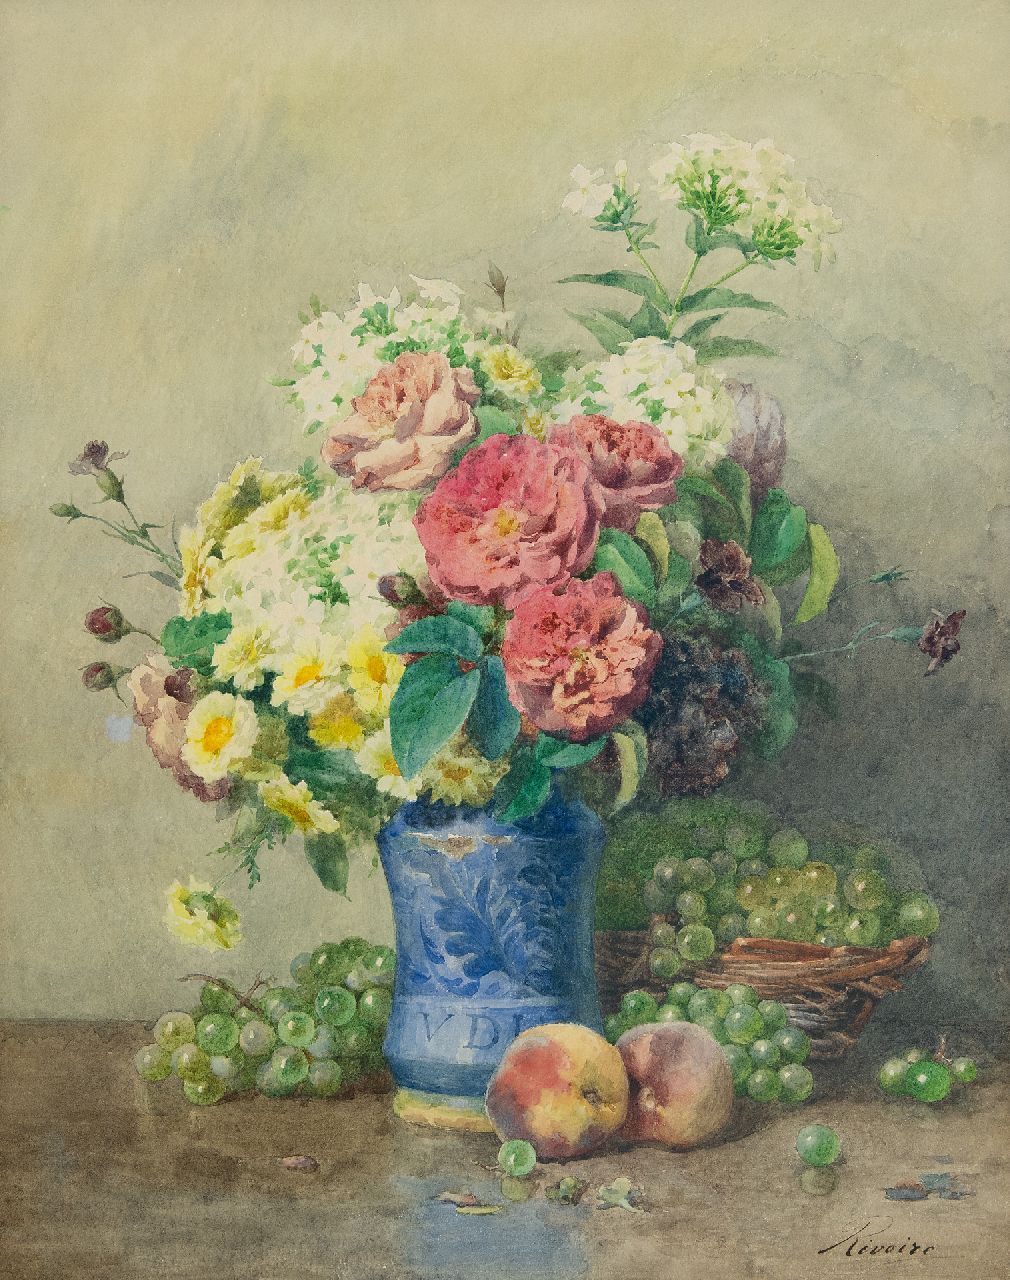 François Rivoire | Still life with roses, phloxes and fruit, watercolour on paper, 58.4 x 46.4 cm, signed l.r.